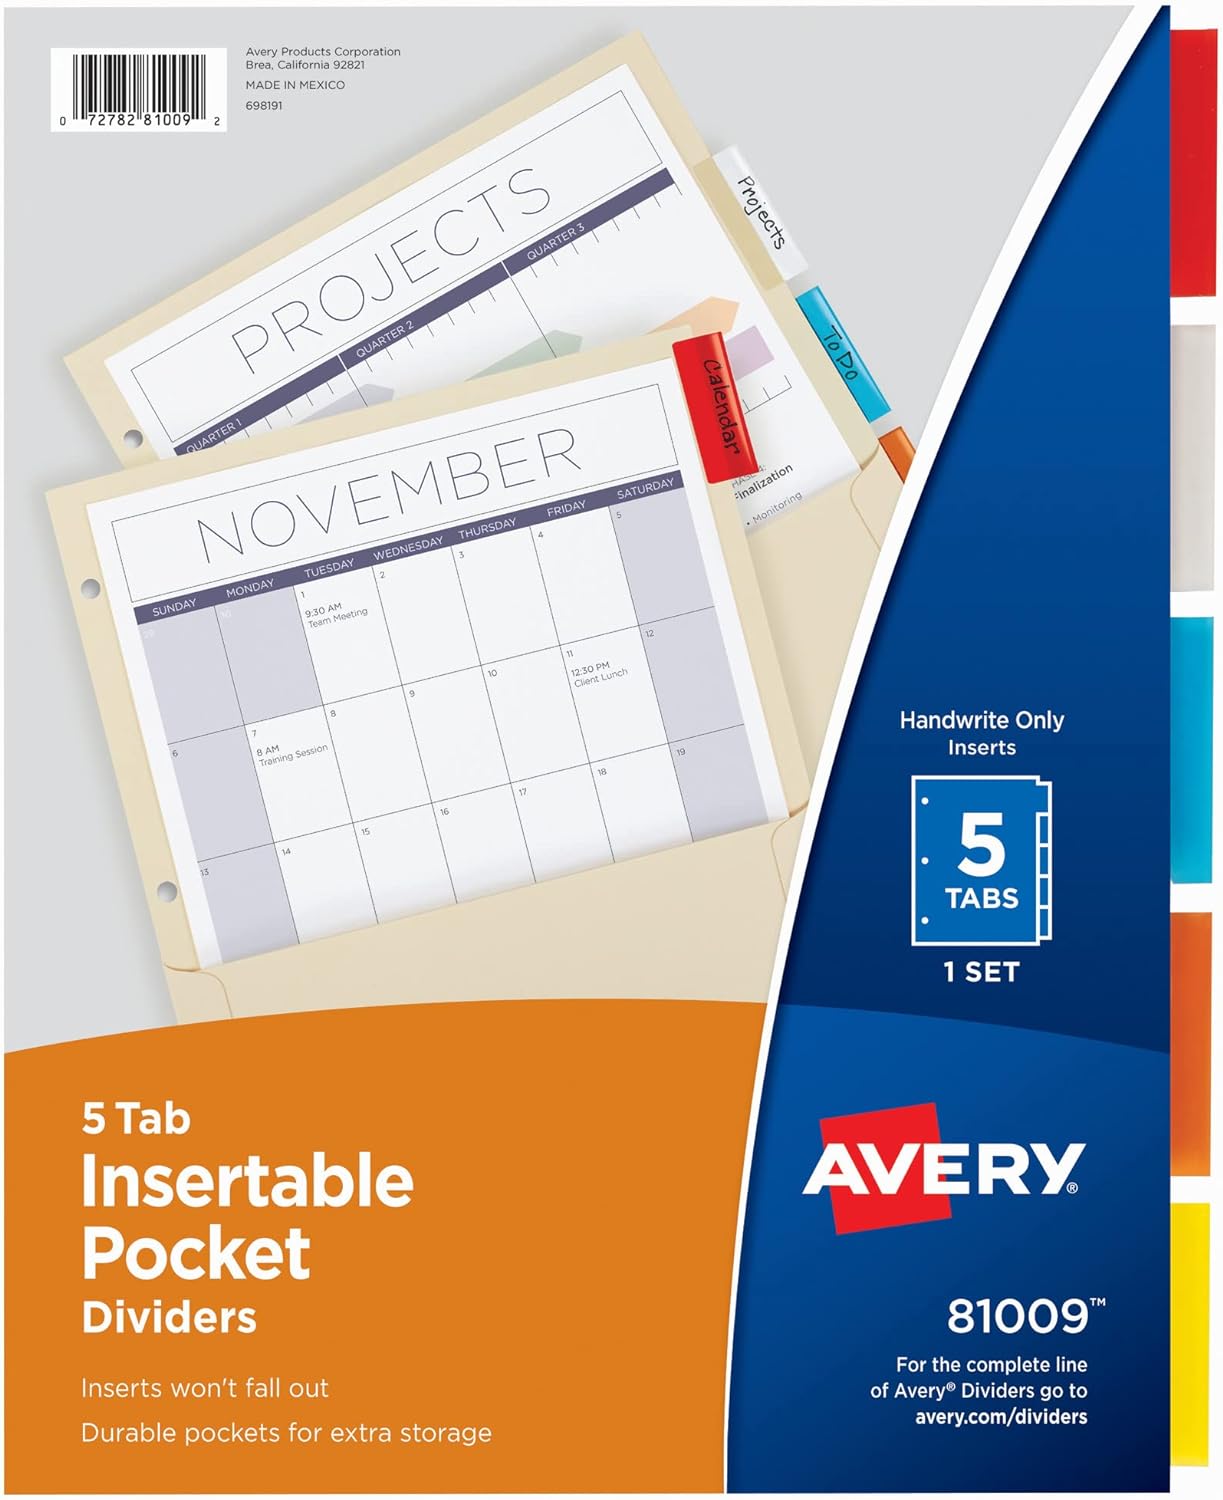 Avery Insertable Dividers with Pockets, 5 Tab Dividers for 3 Ring Binders, Manila Paper, Multicolor Tabs, Works with Sheet Protectors, 1 Set (81009)